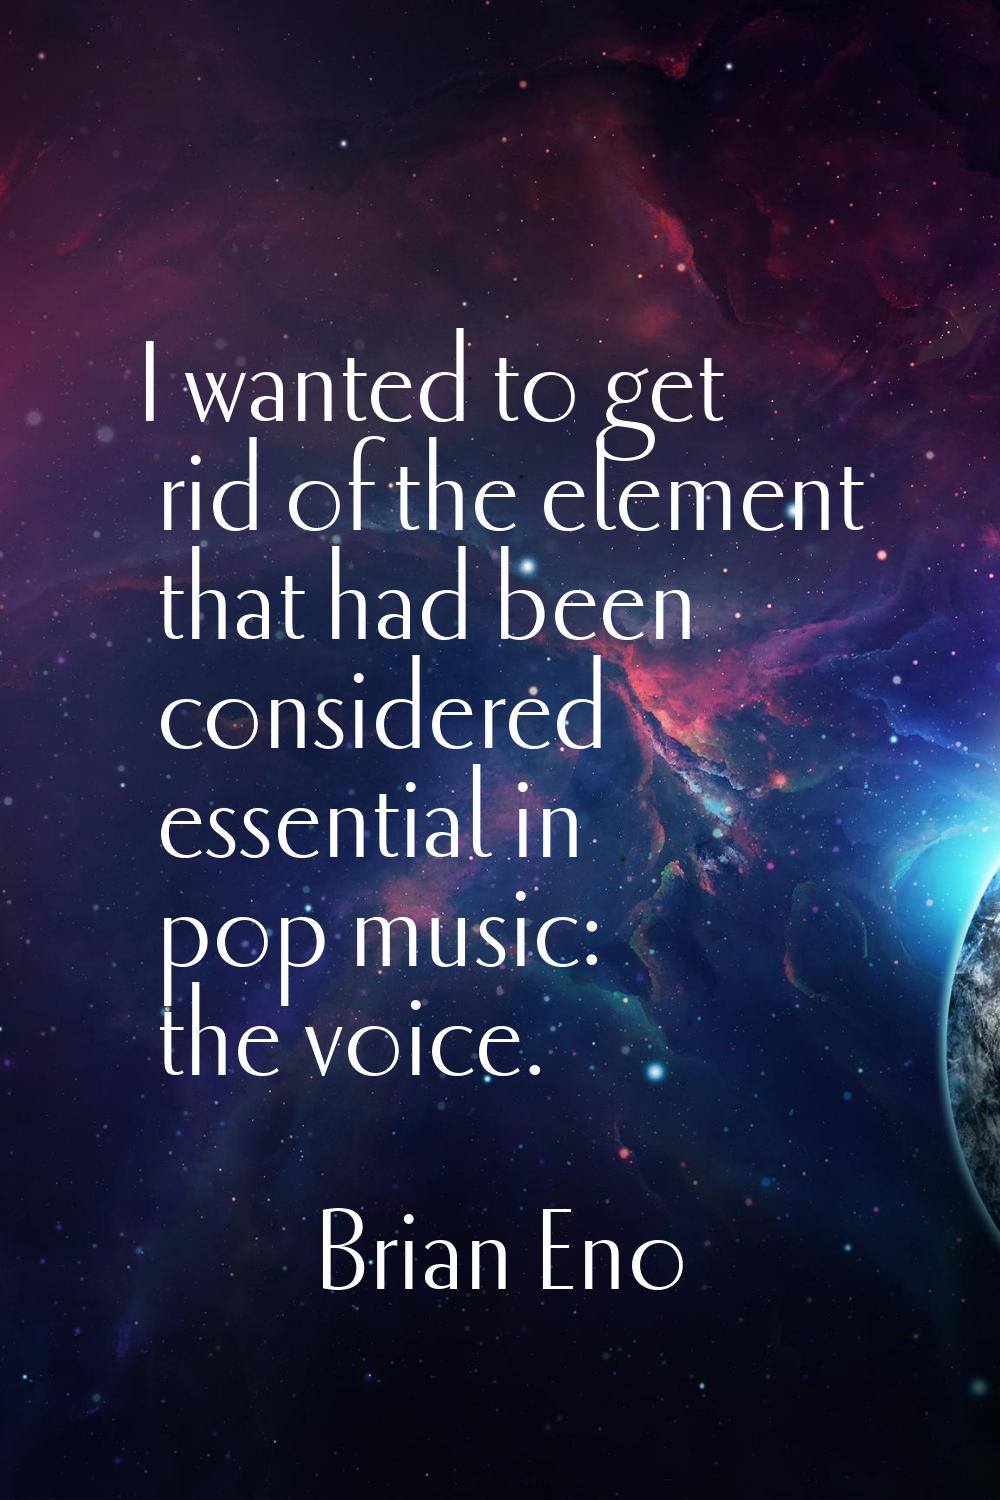 I wanted to get rid of the element that had been considered essential in pop music: the voice.